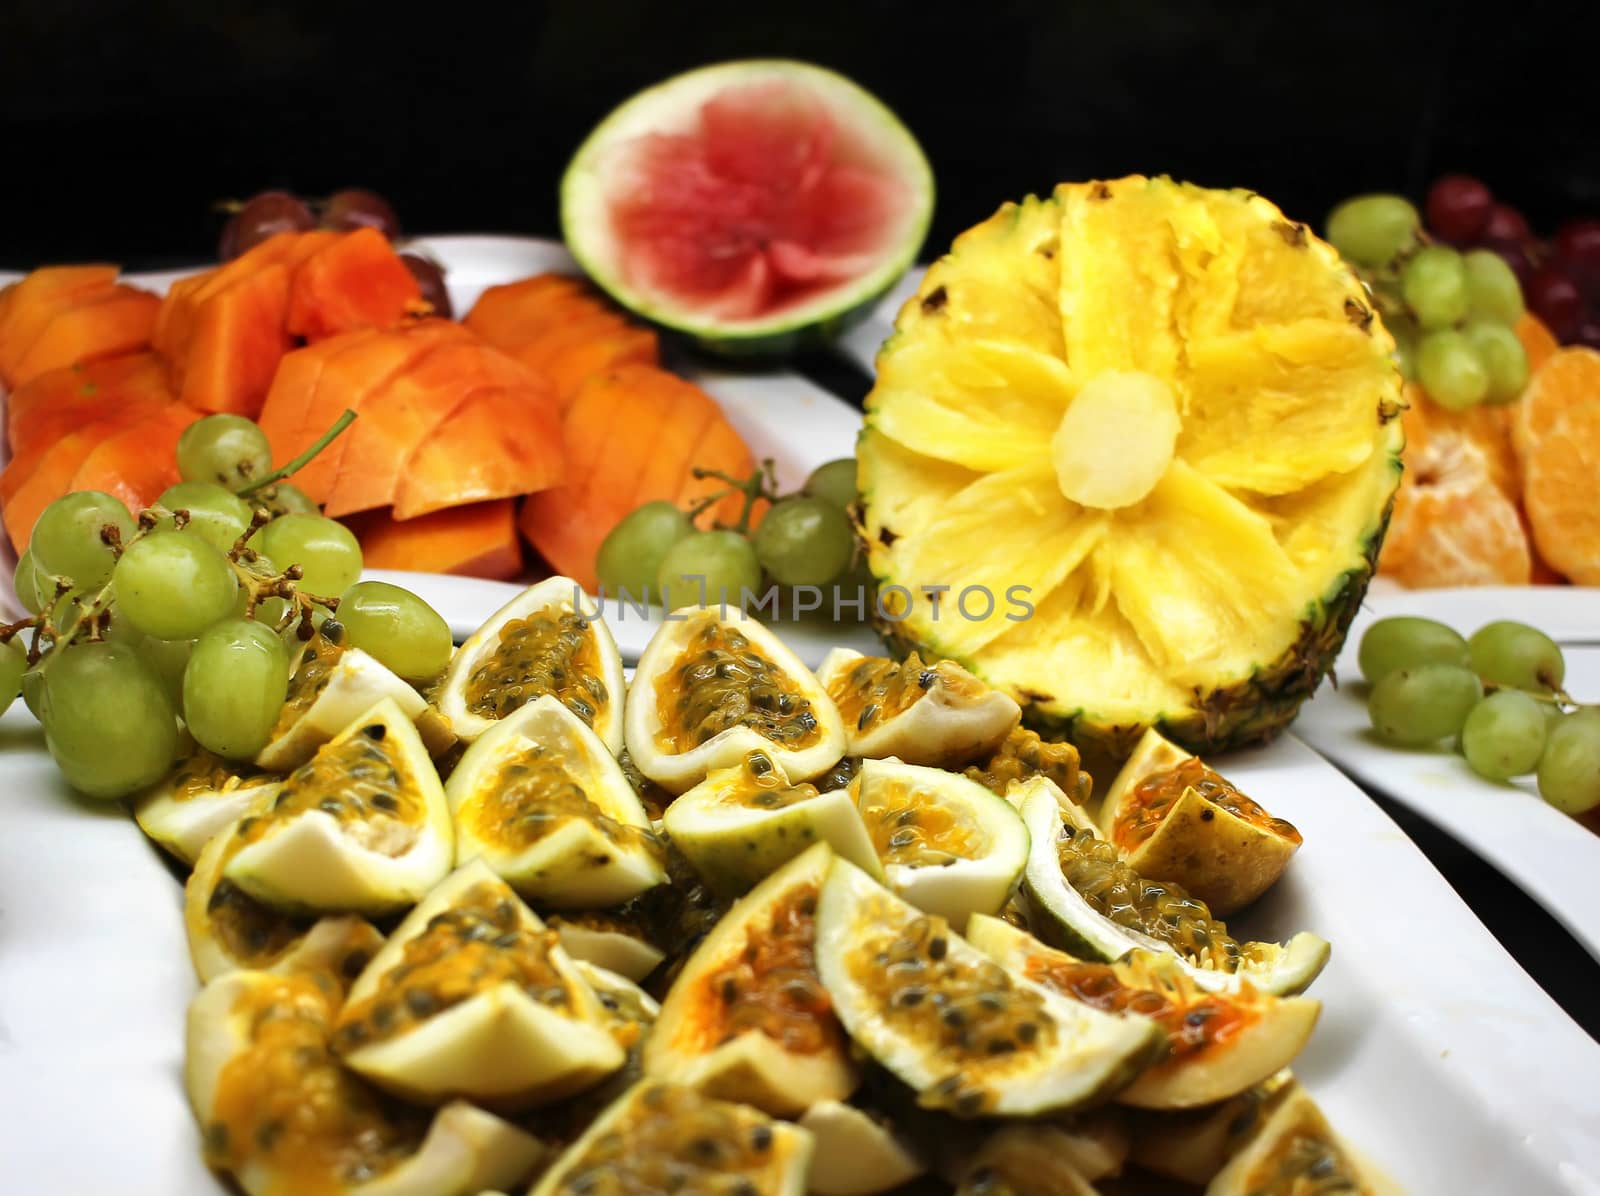 Passion fruit pieces and other tropical fruits